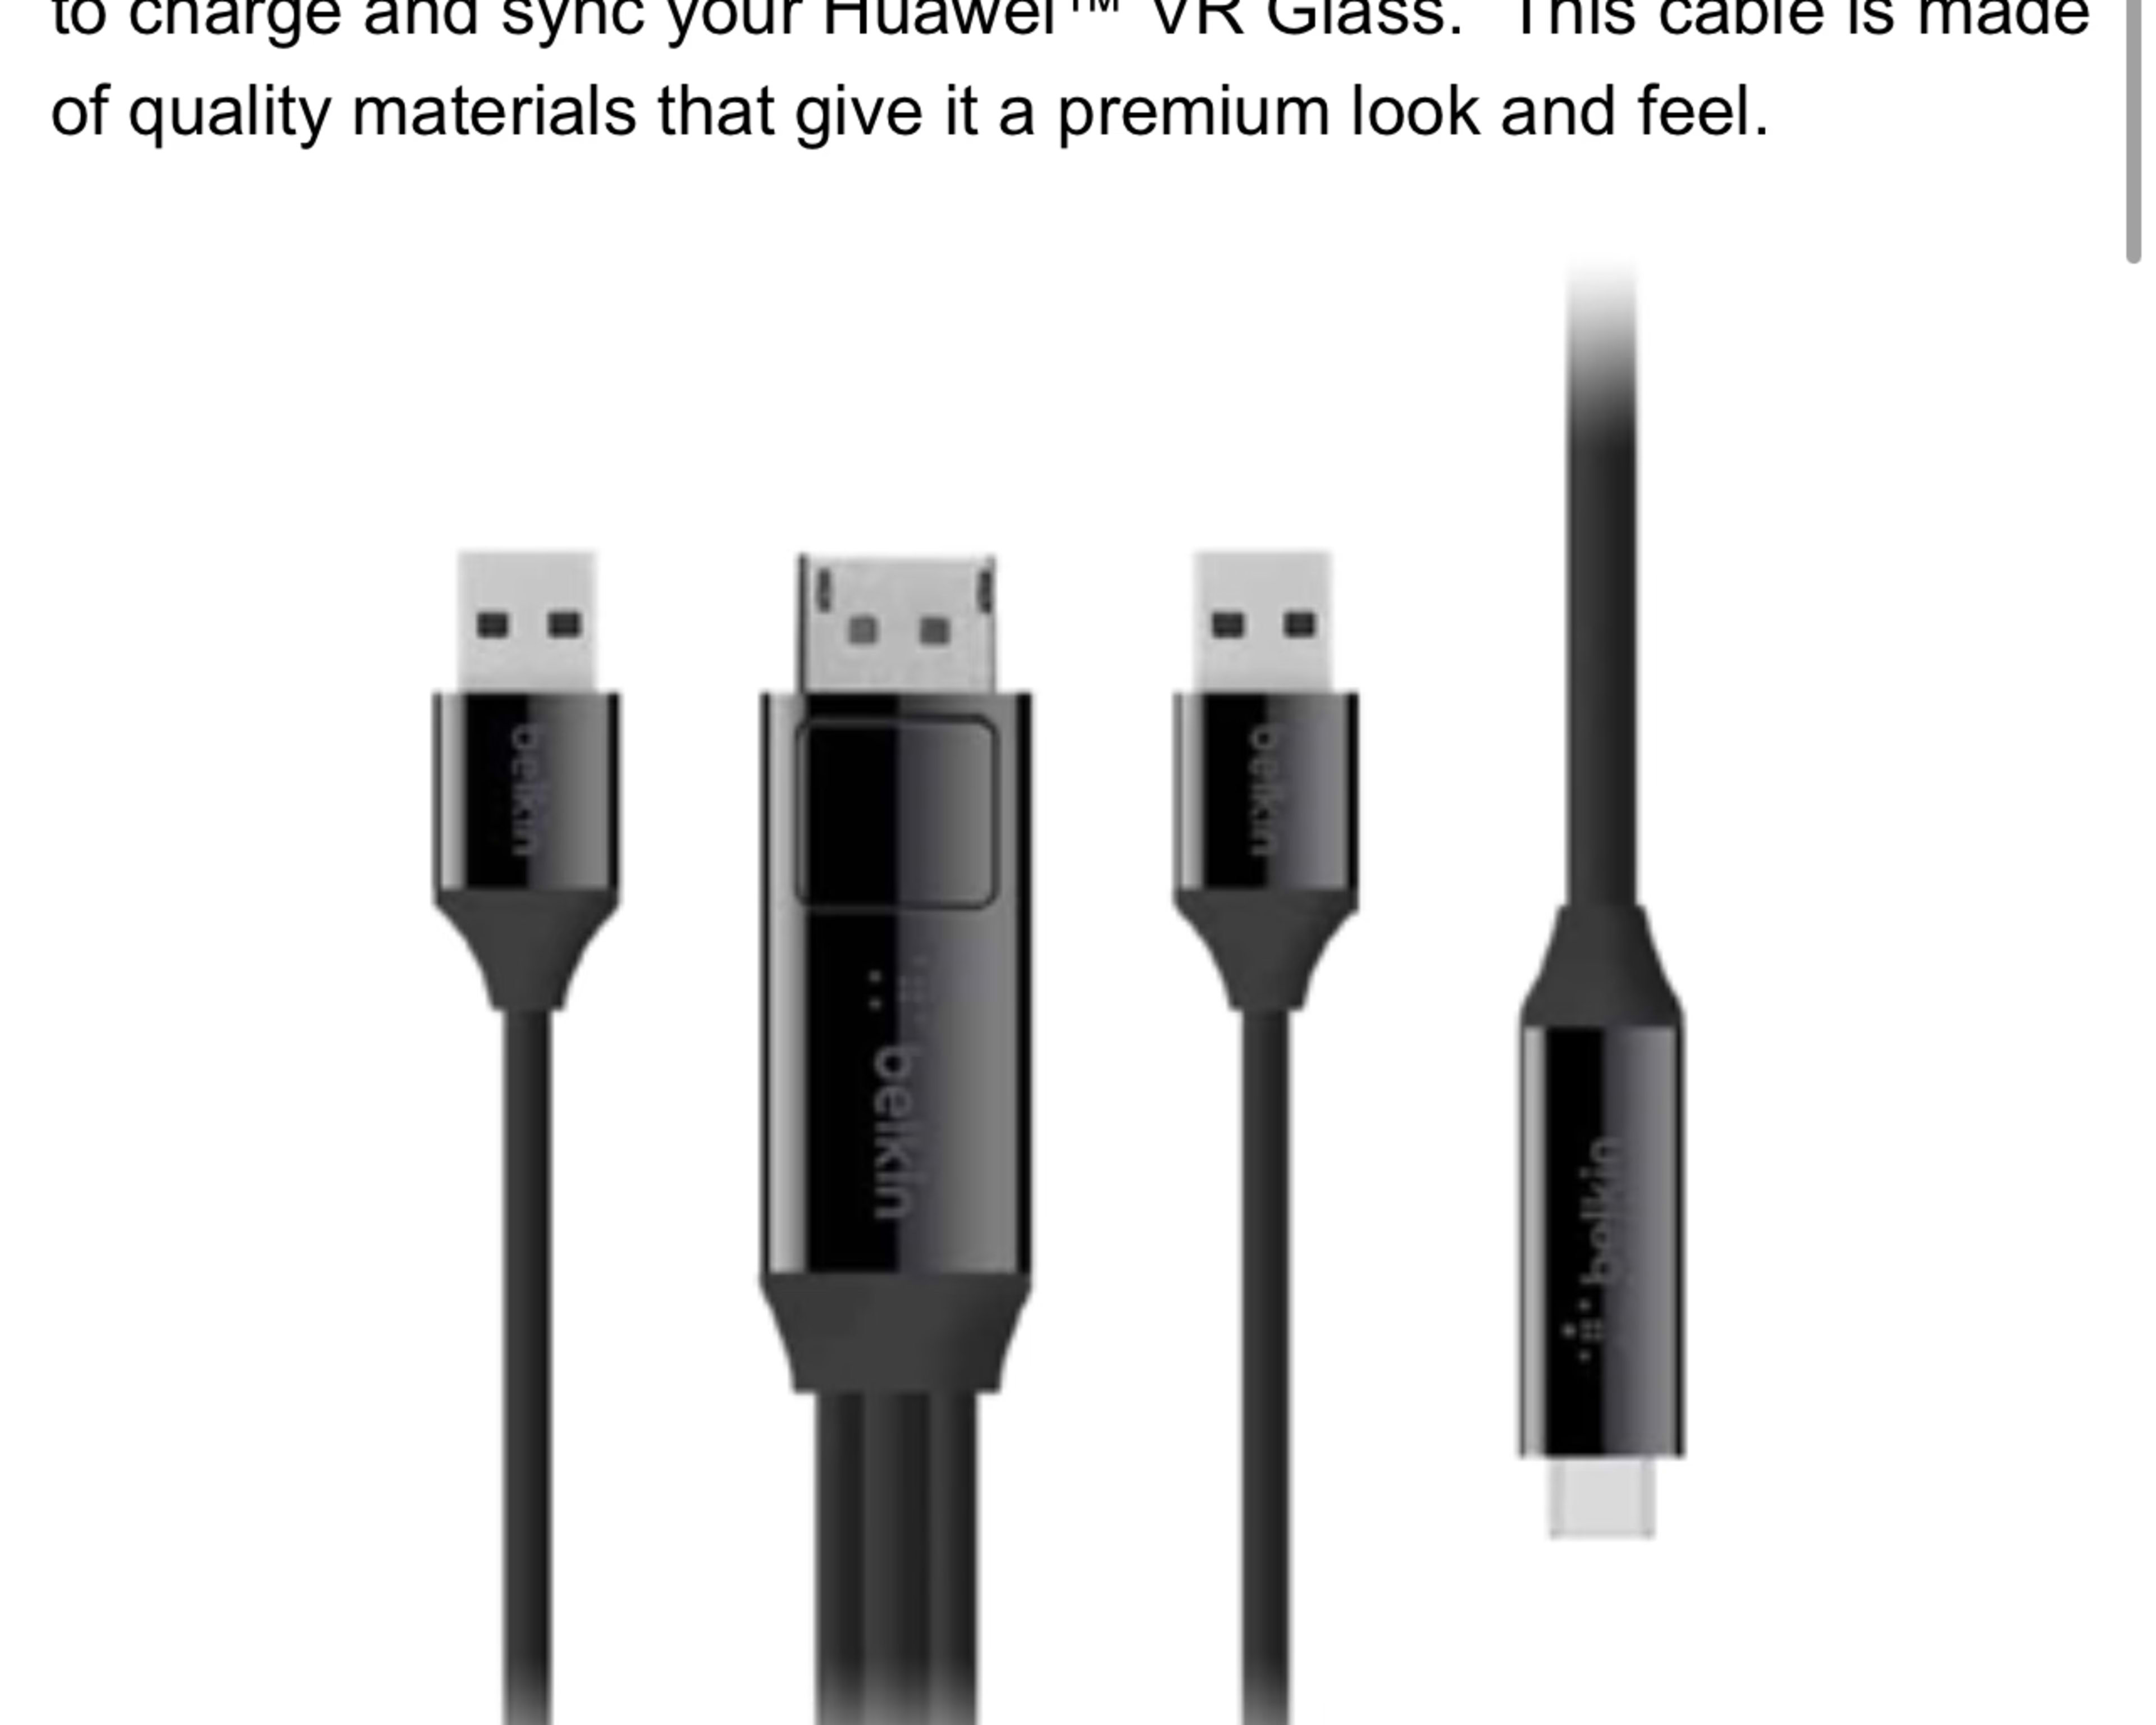 Belkin Charge and Sync Cable for USB-C monitor or VR